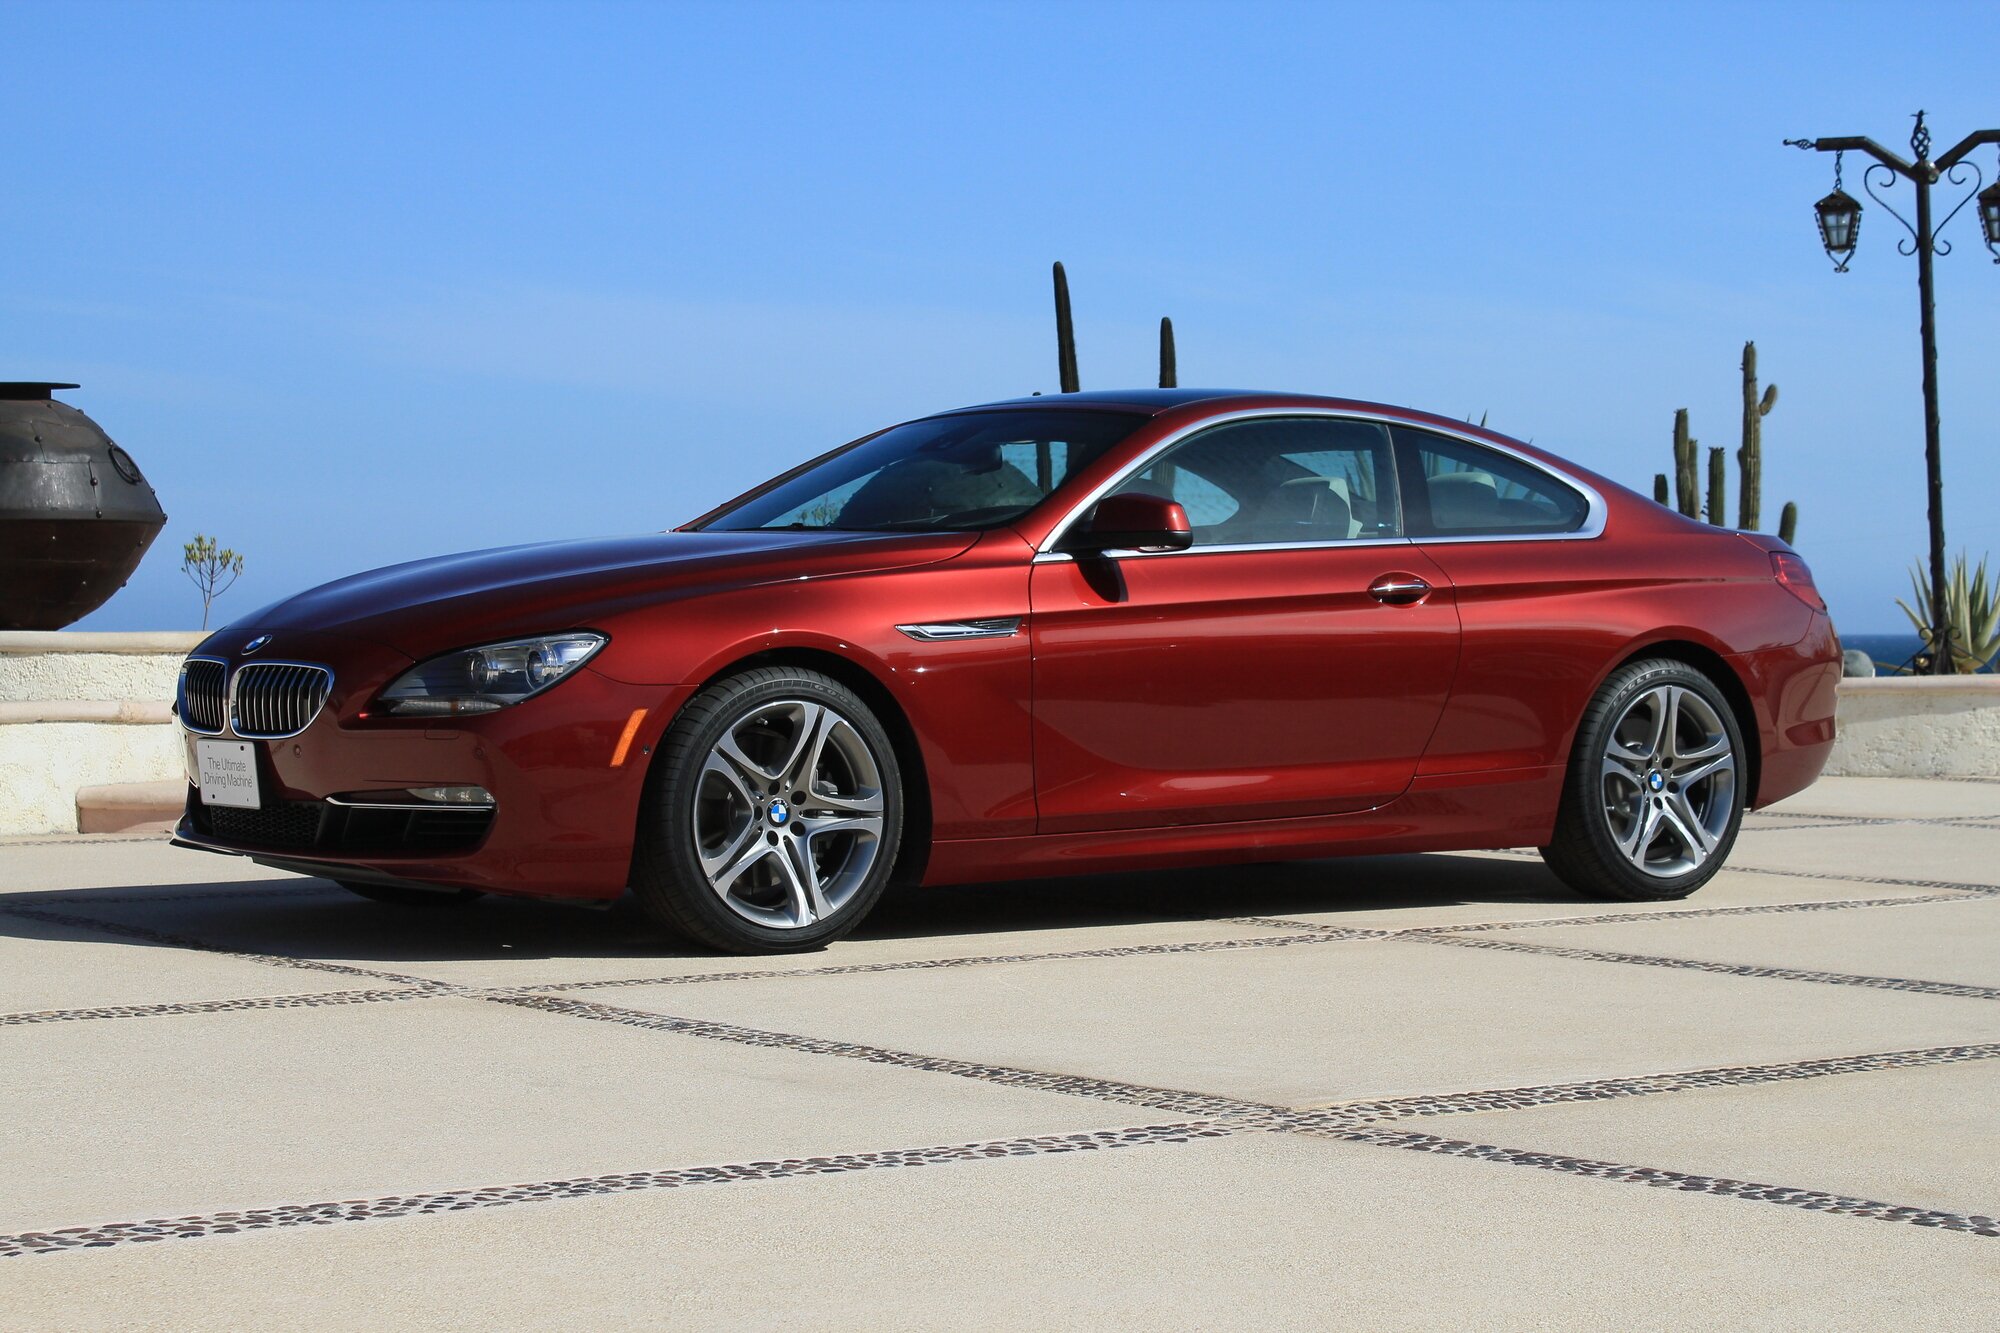 Six-Cylinder 2012 BMW 640i Coupe Coming To U.S.: Report